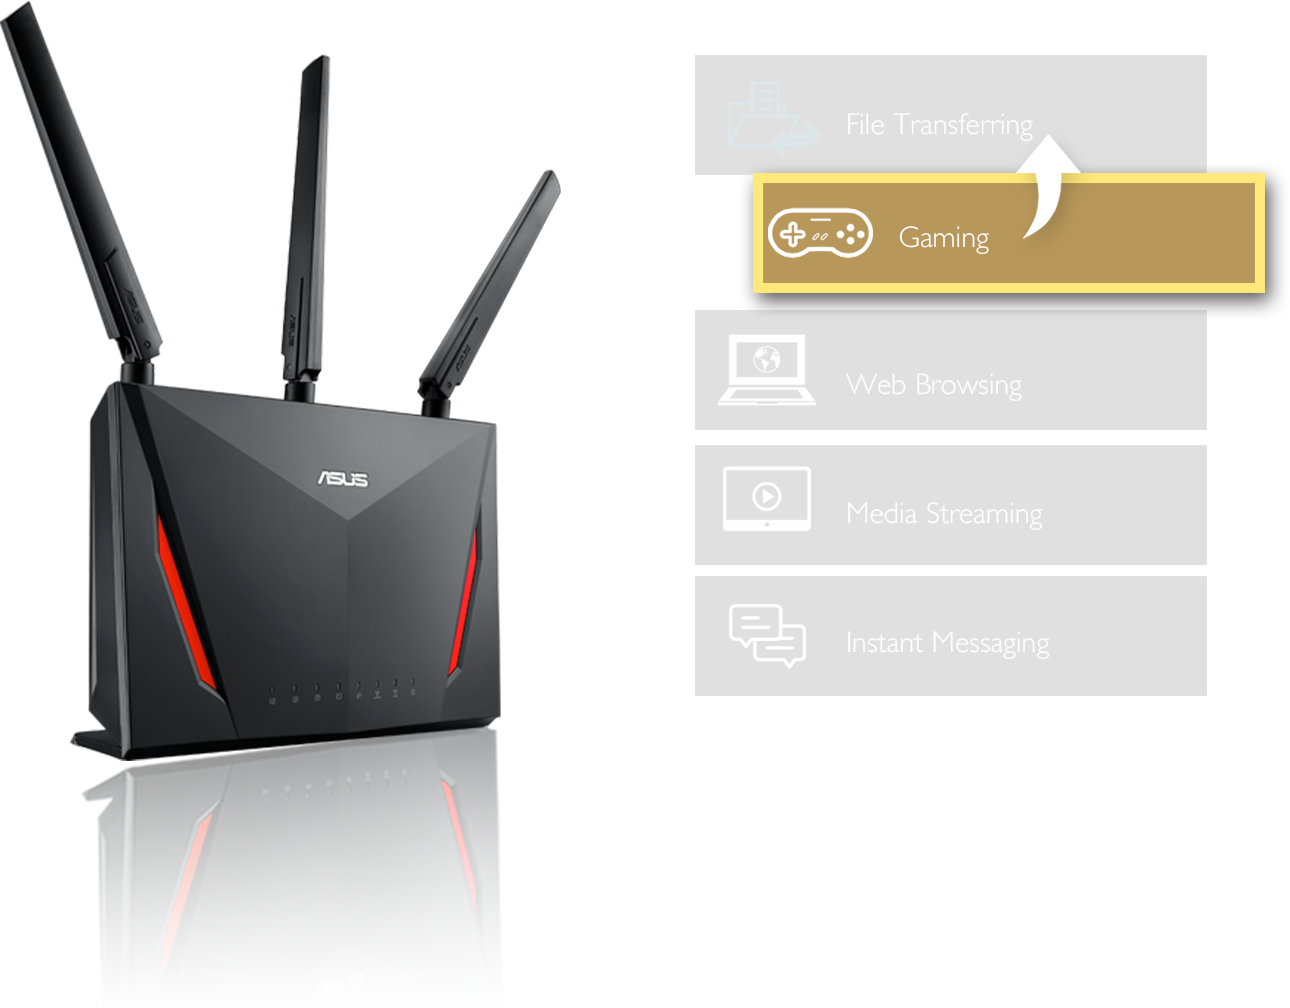 ASUS RT-AC86U router allows users to select a type of traffic and prioritized the packets in them by setting adaptive QoS in ASUSWRT.